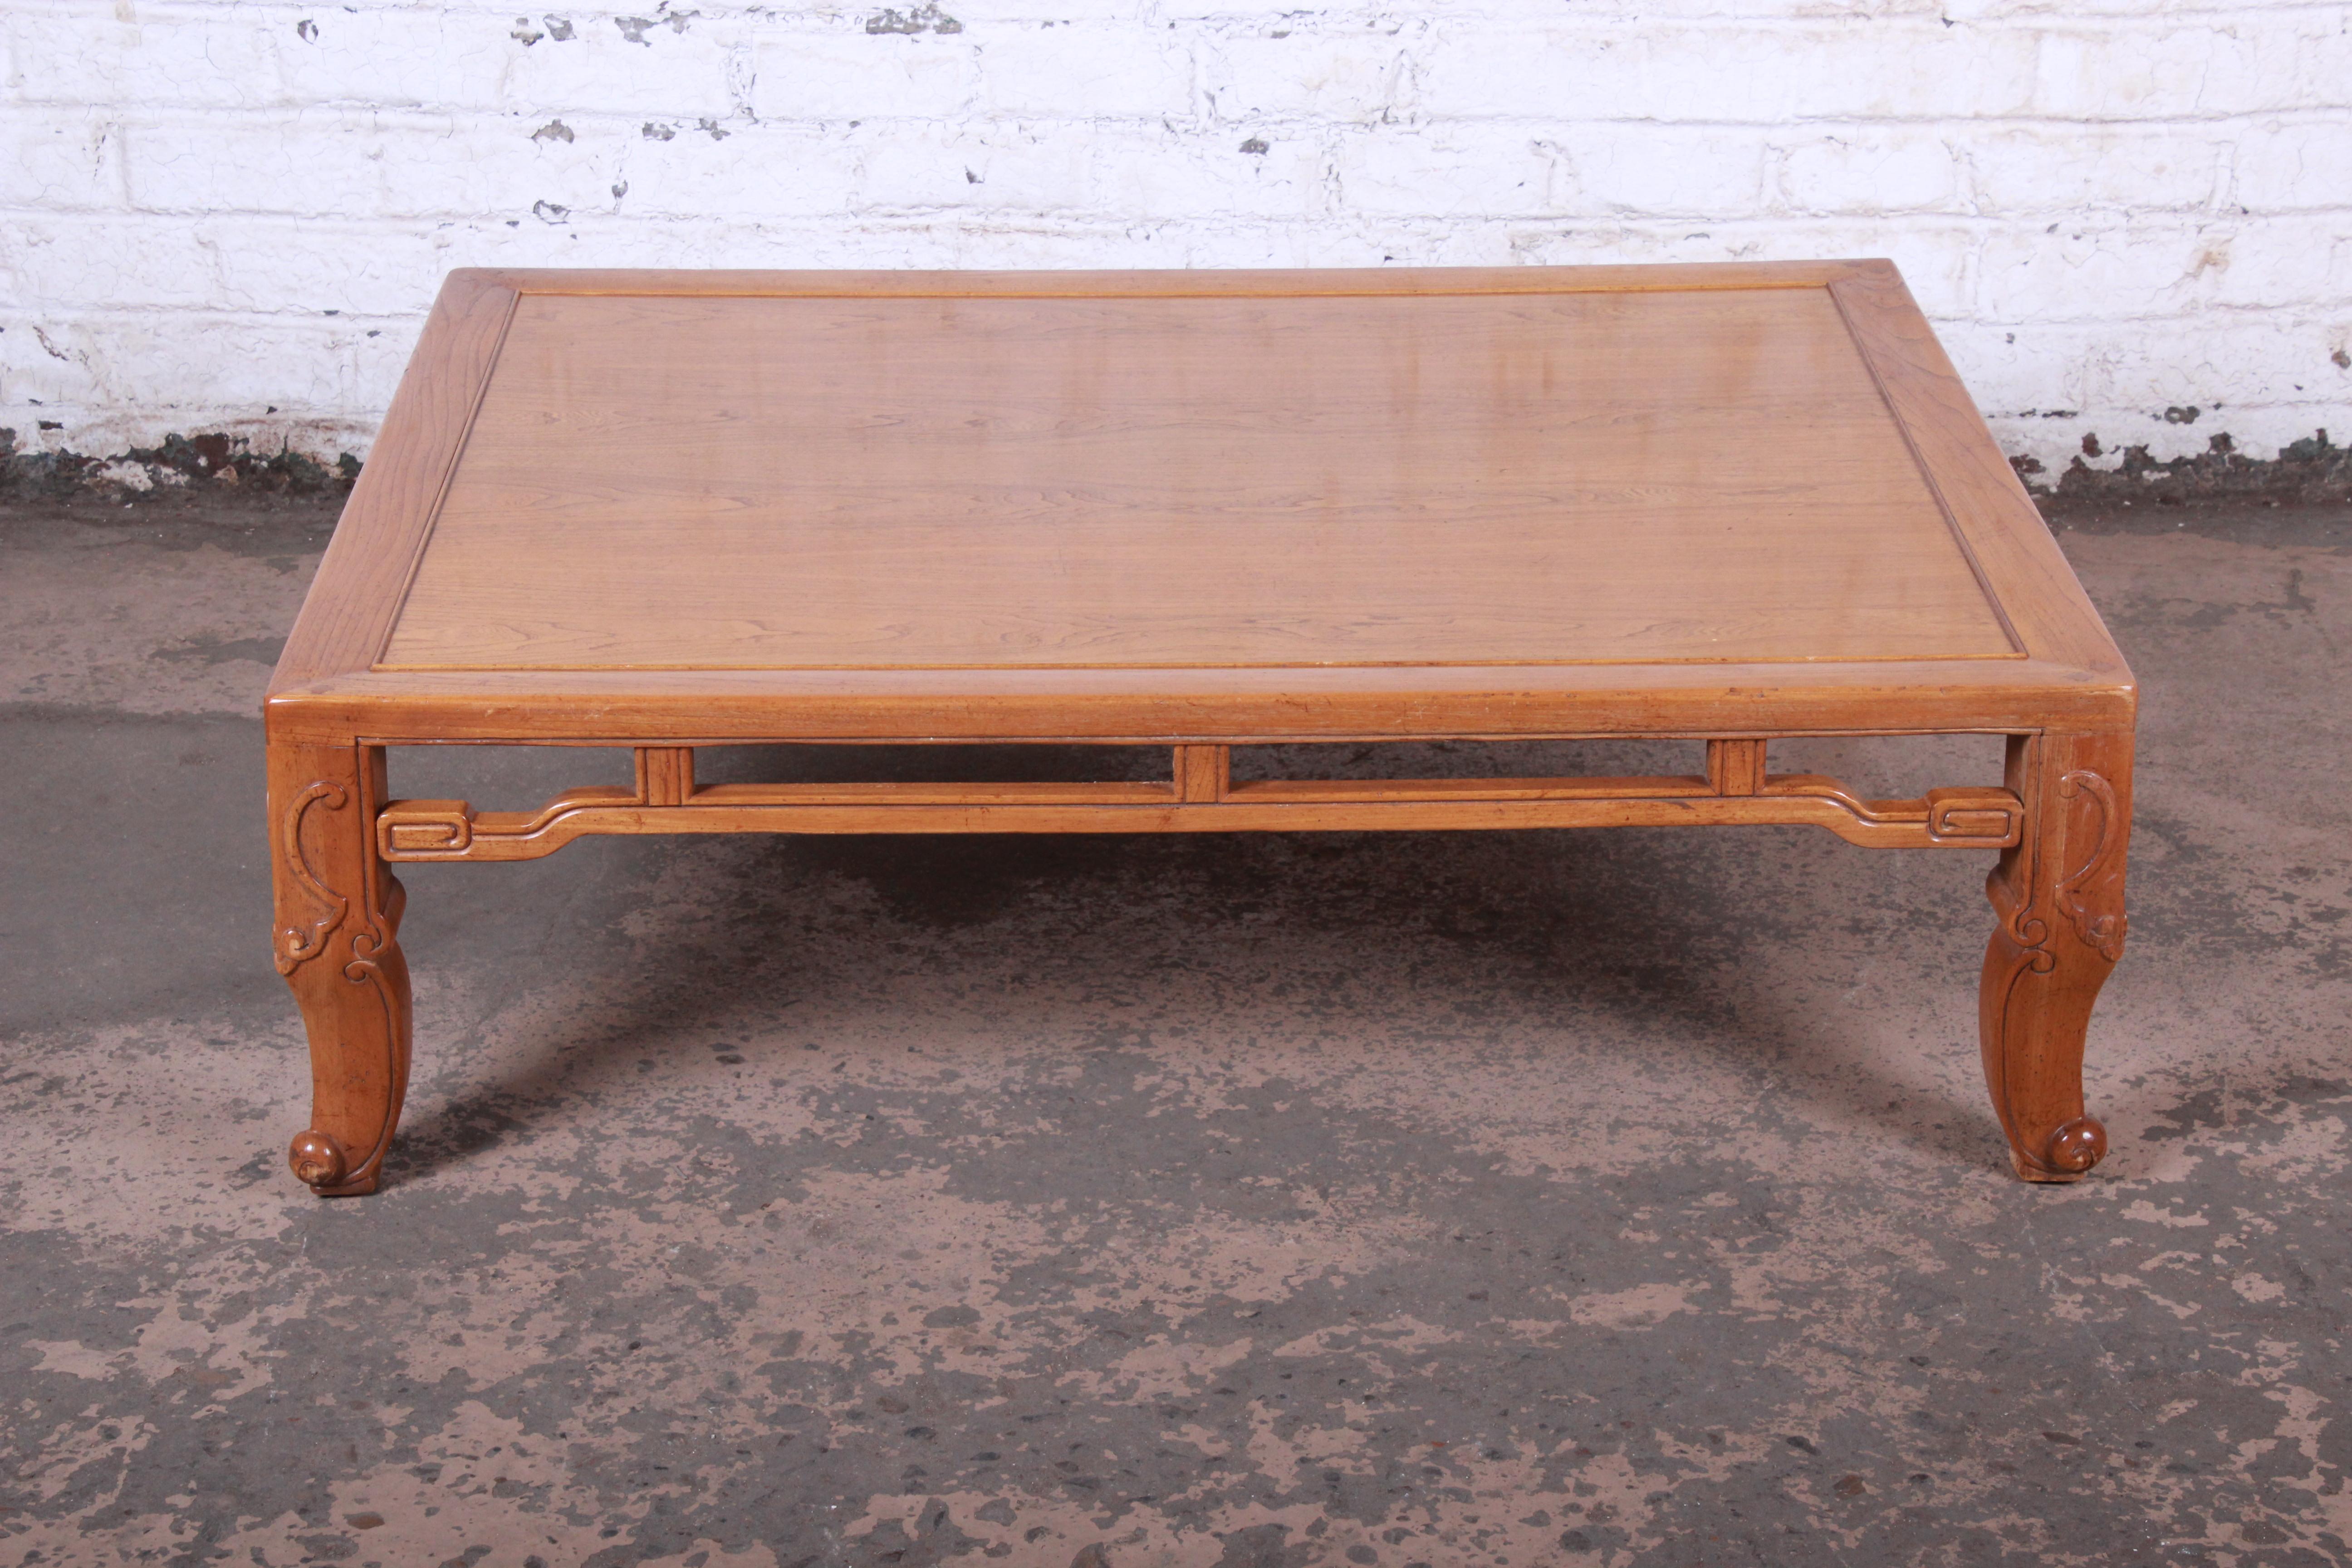 Mid-Century Modern Hollywood Regency chinoiserie large coffee or cocktail table

Designed by Michael Taylor for Baker Furniture

USA, circa 1970s

Elm wood with carved Asian details

Measures: 50